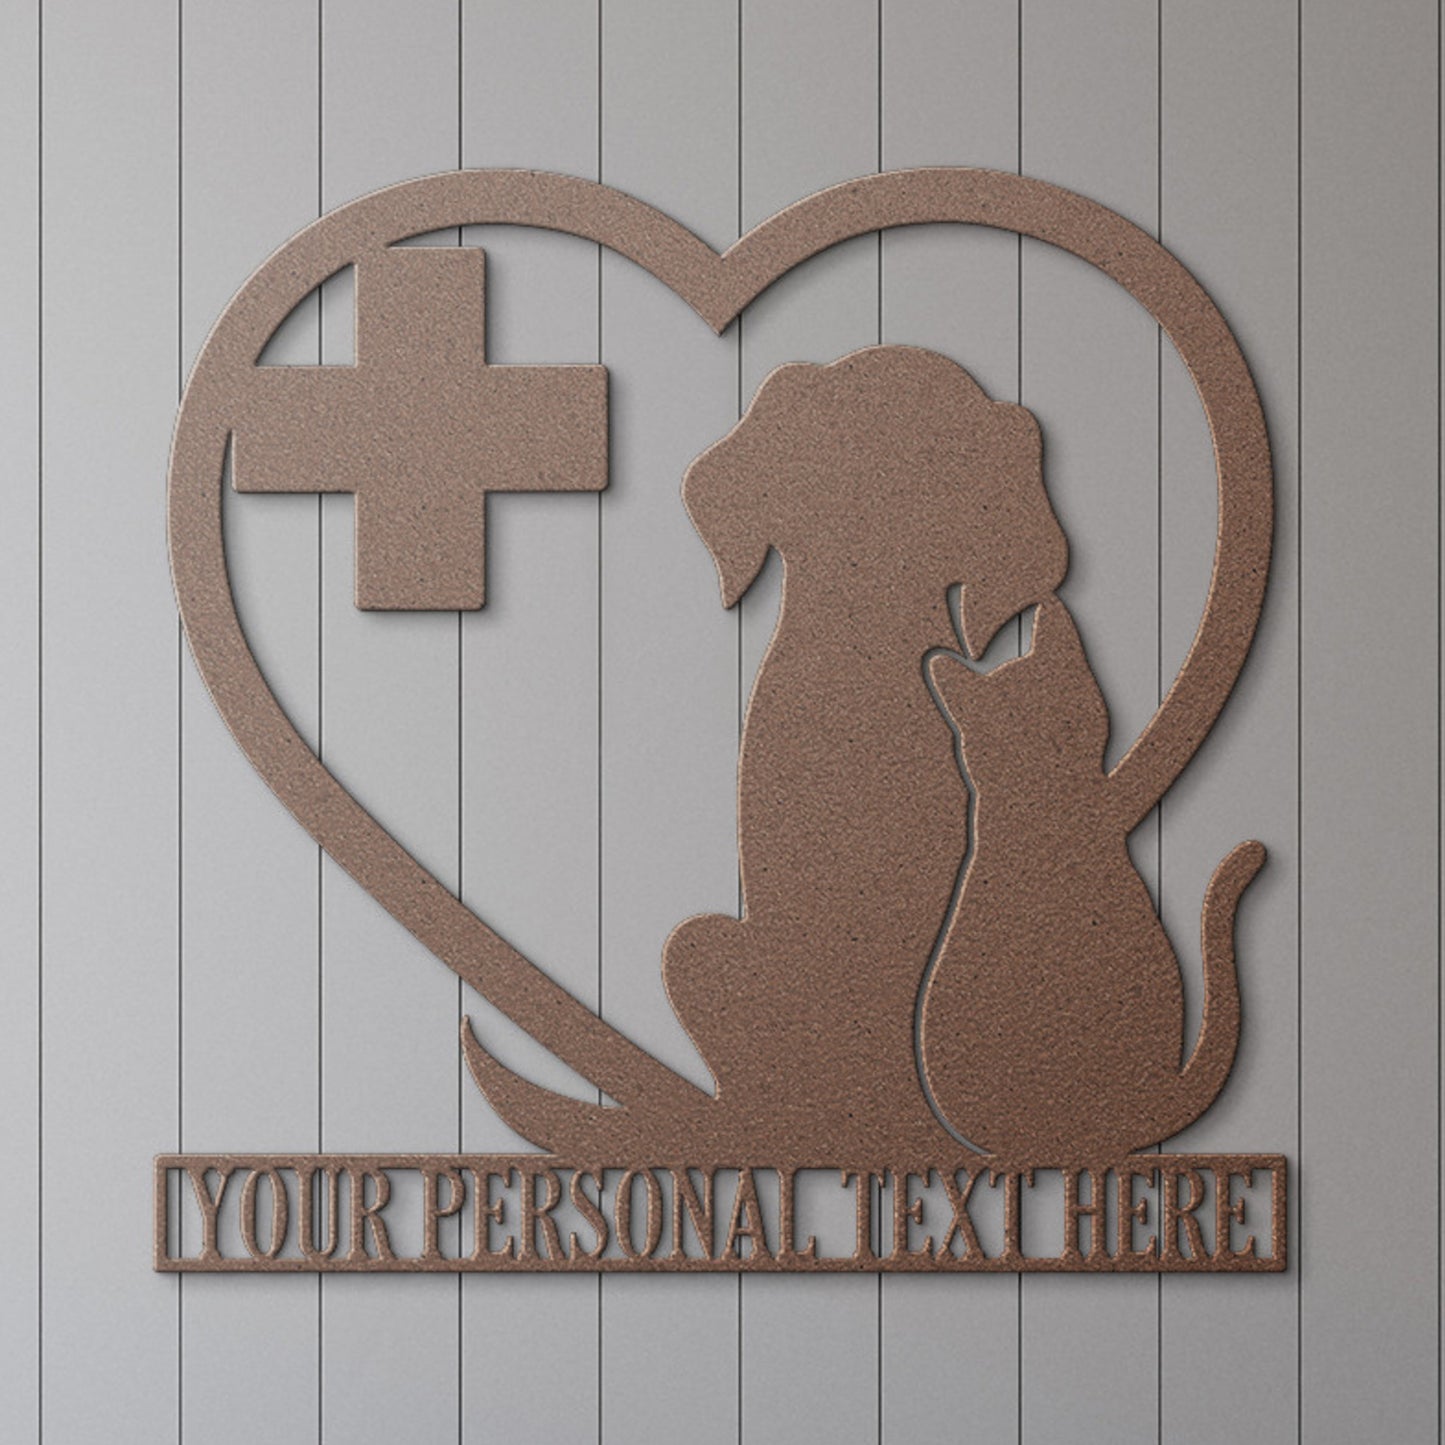 Personalized Vet Pet Care Name Metal Sign. Customizable Vet Doctor Wall Decor. Vet Healthcare Sign. Dog And Cat Decor. Veterinary Gift